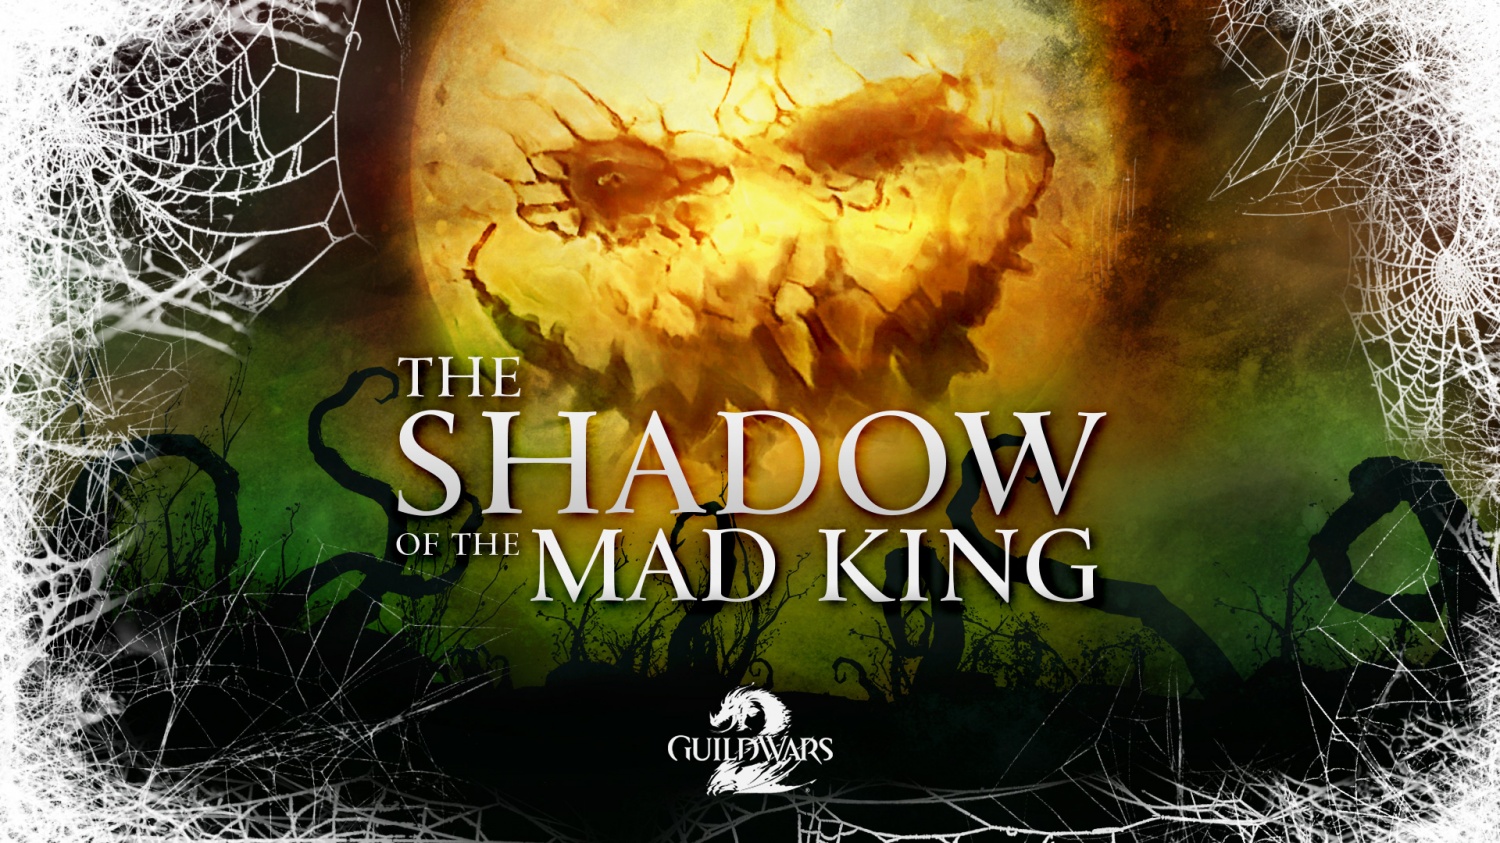 SHADOW OF THE MAD KING